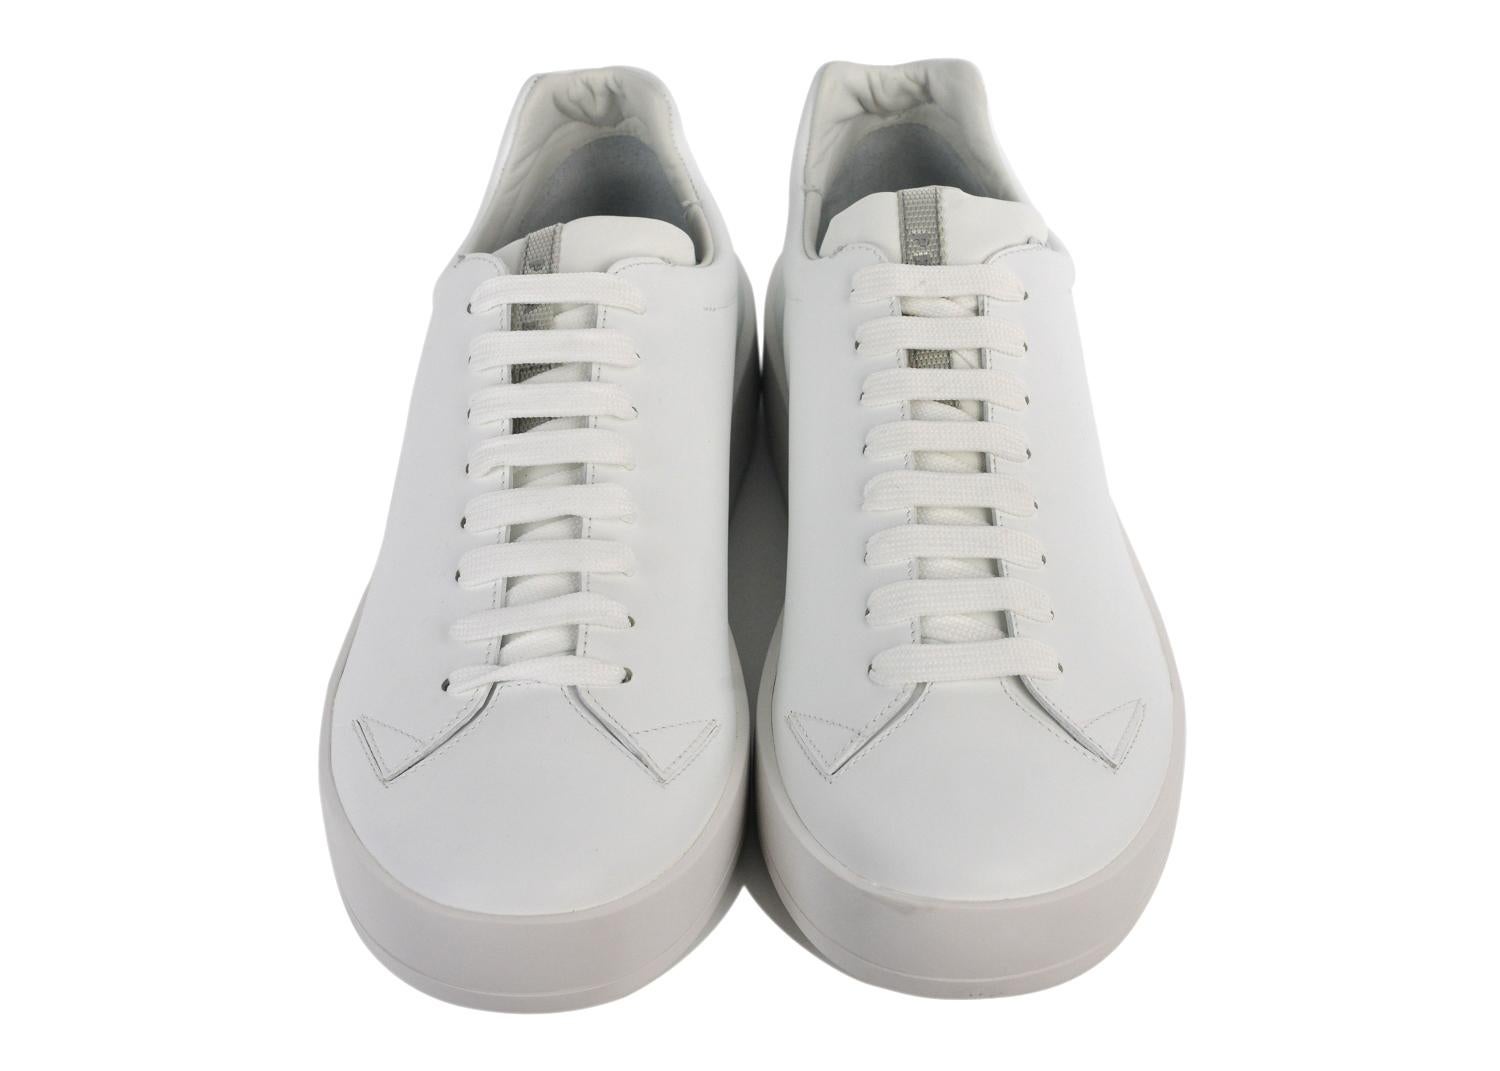 Prada Mens White Leather Lace Up Low Top Sneakers In New Condition For Sale In Brooklyn, NY